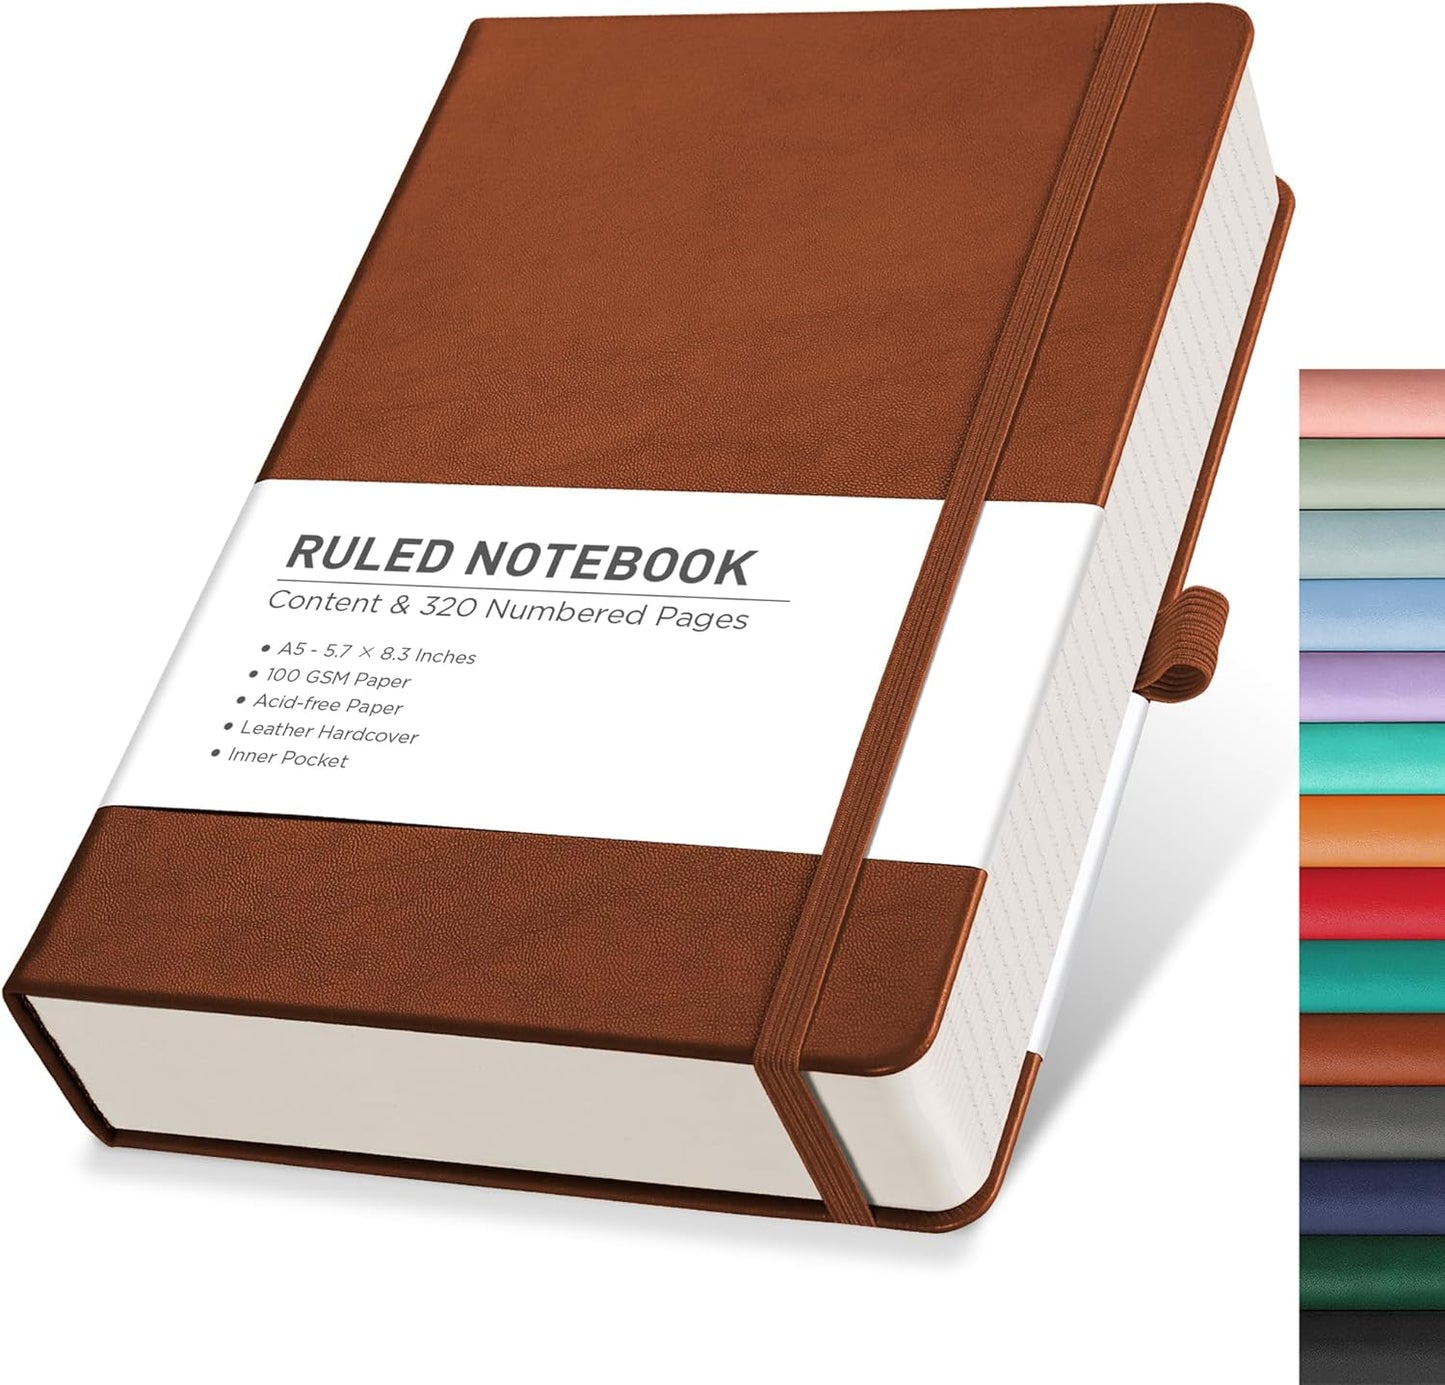 Notebook Journal - A5 College Ruled Notebook with 192 Numbered Pages, Notebook for Work, School, Writing, 100 GSM Acid-Free Paper, Leather Hardcover, Inner Pocket, 5.7'' × 8.3'' (Brown)